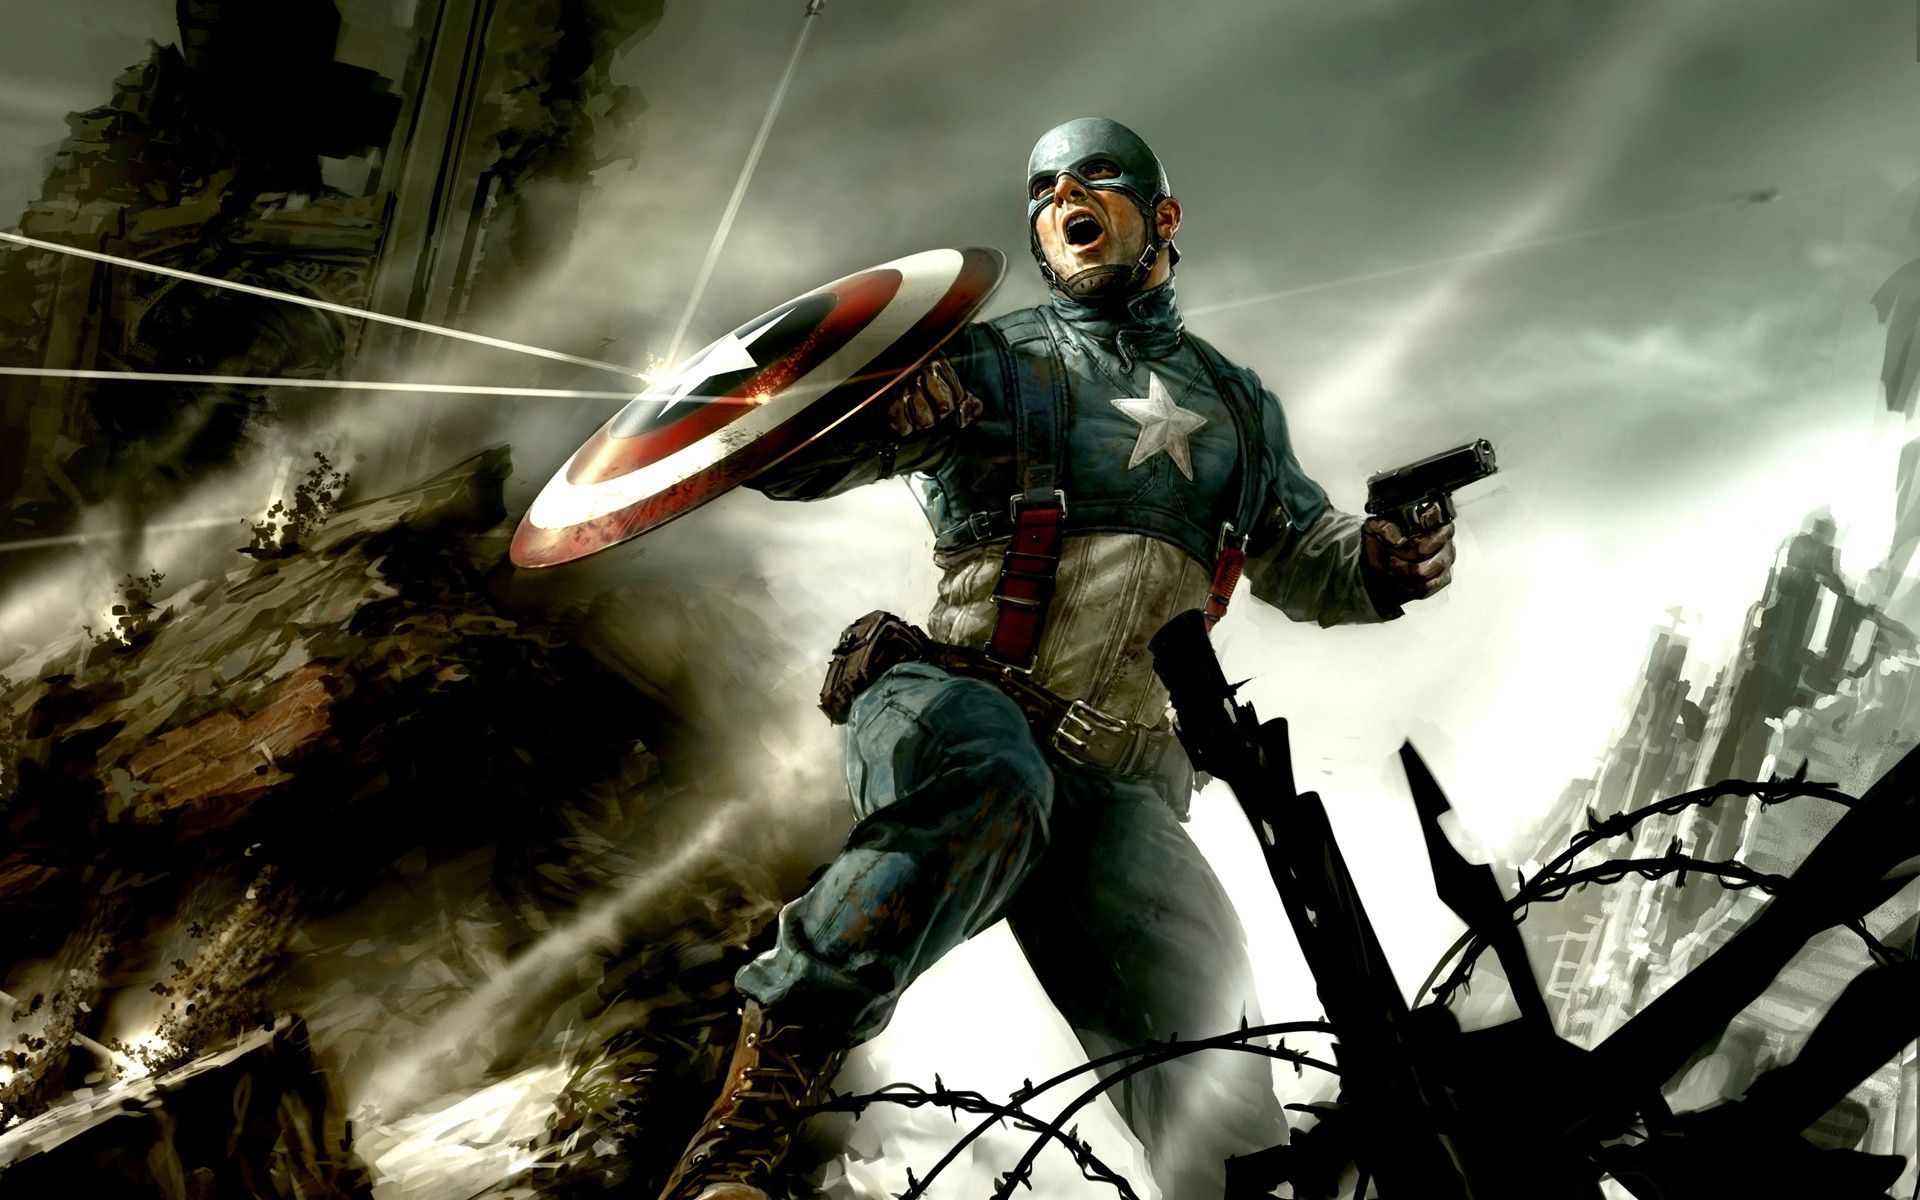 10 Ways Captain Americas Shield Bends The Rules Of Science